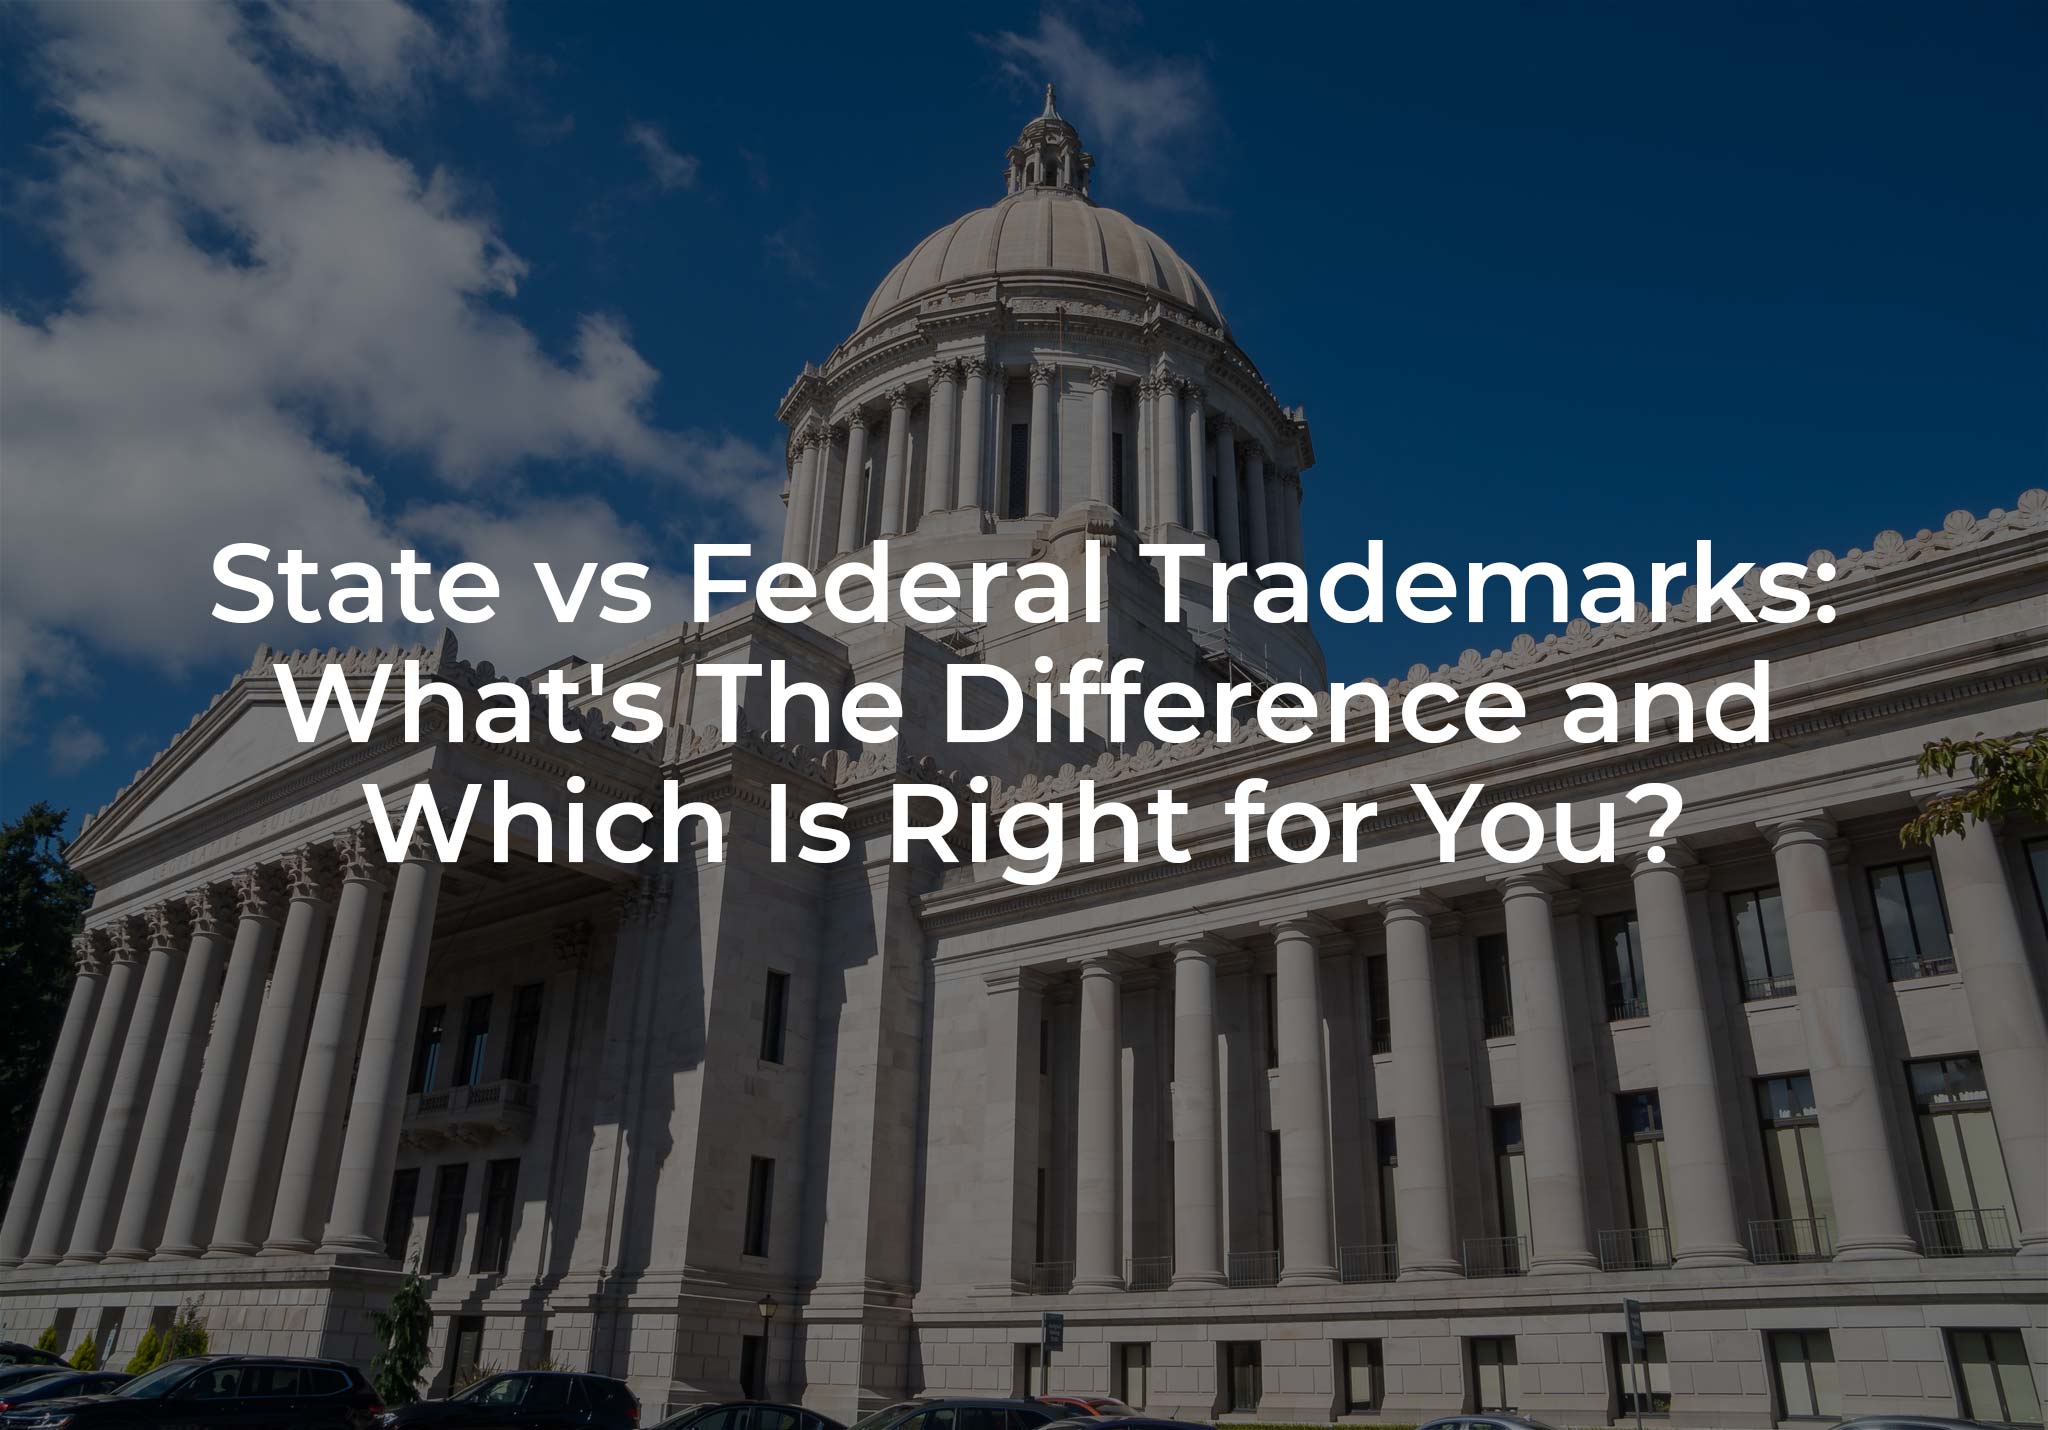 State vs Federal Trademarks